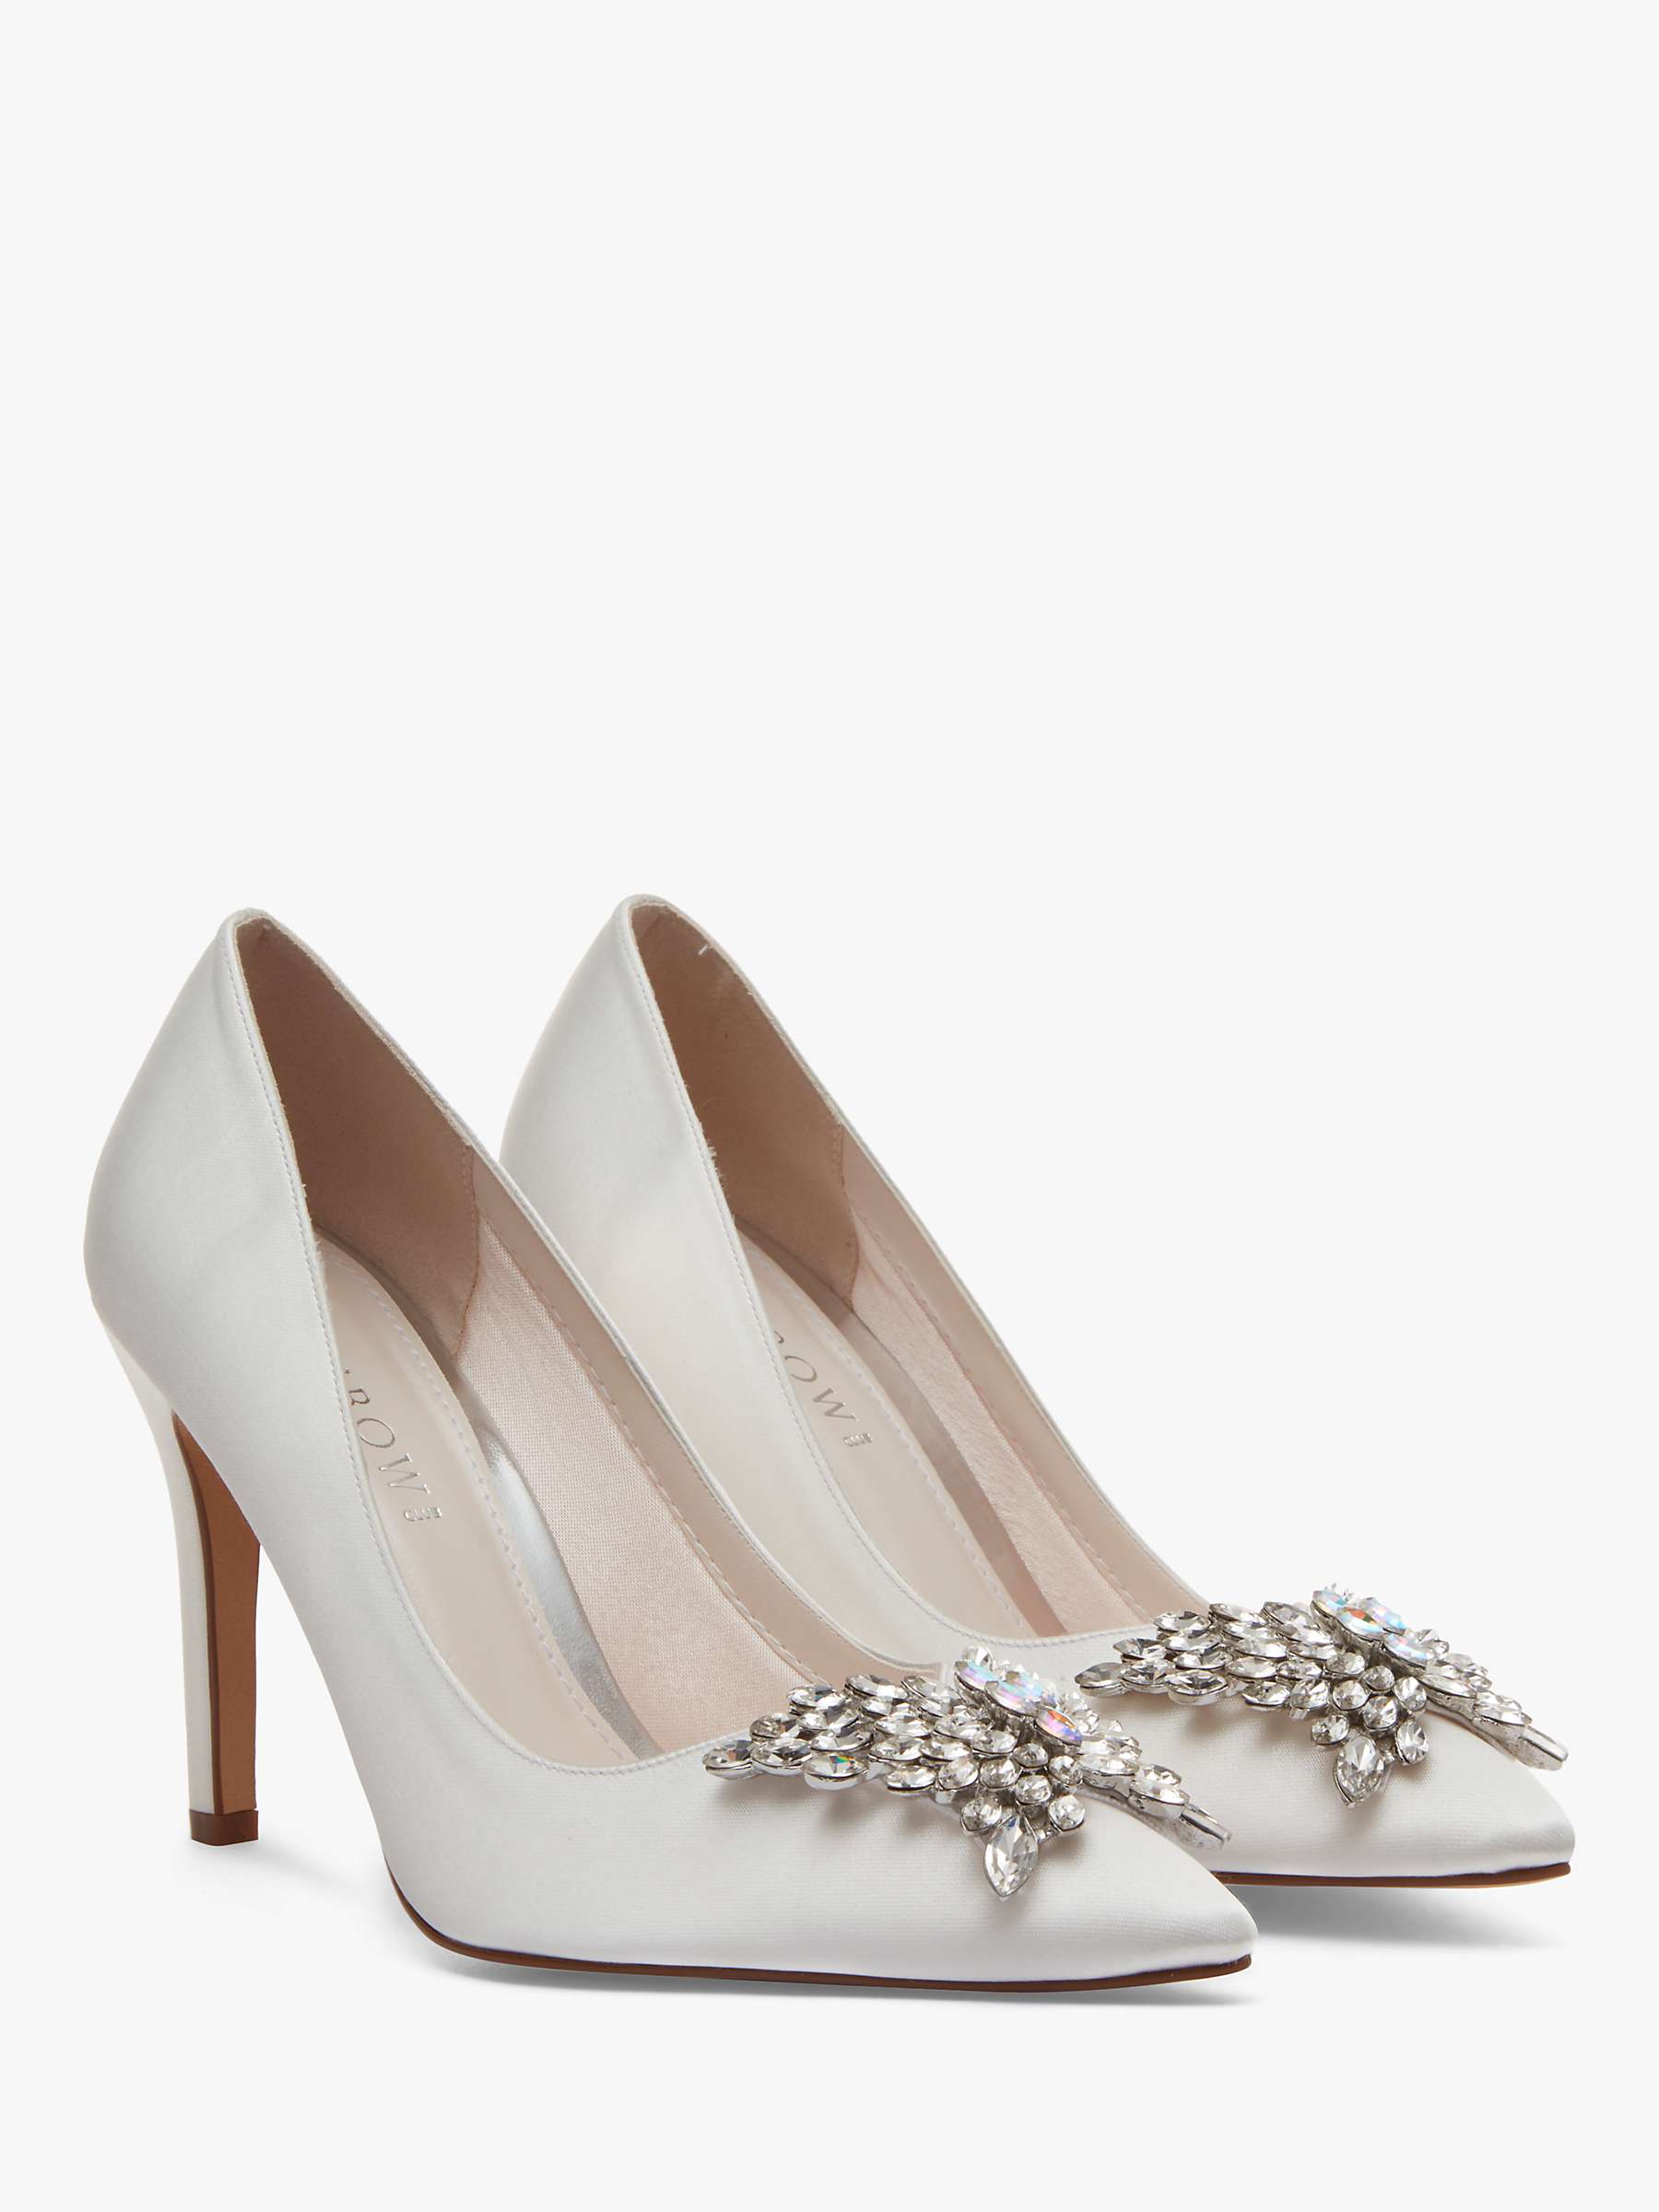 Rainbow Club Nelly Satin Jewel Court Shoes, Ivory at John Lewis & Partners